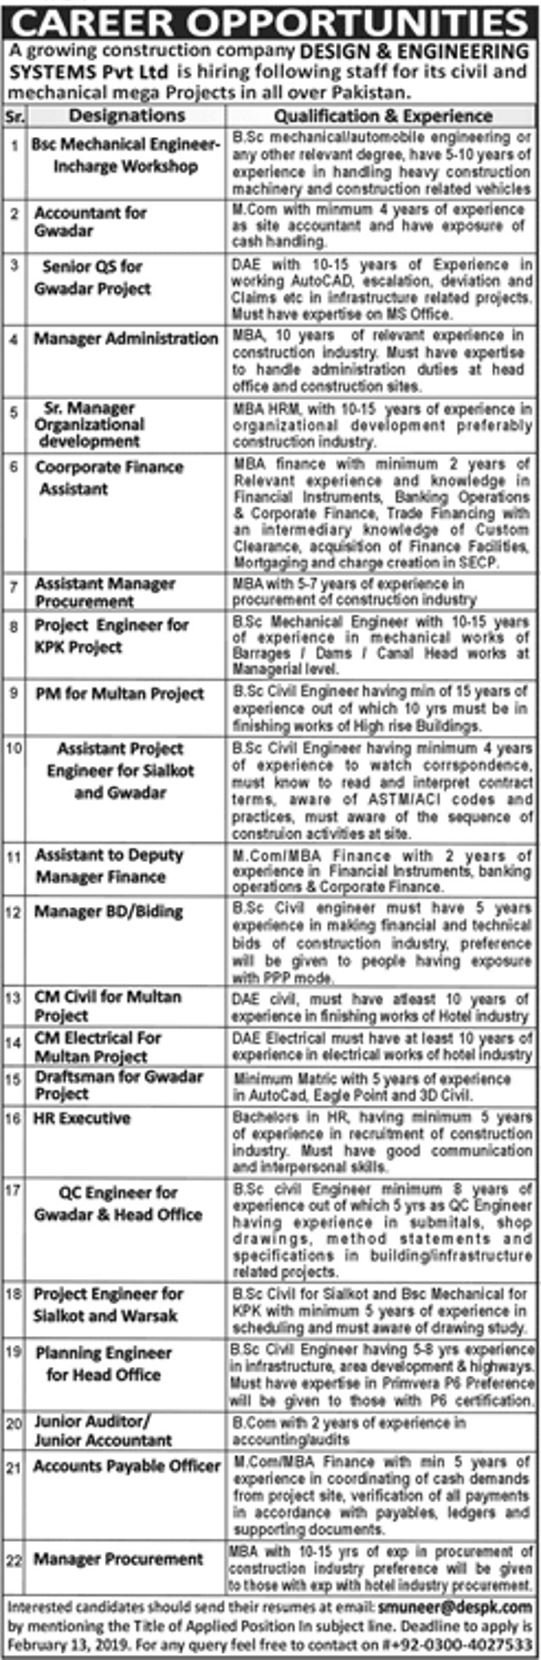 Design & Engineering Systems Pakistan Jobs 2019 for Various Posts for Mega Projects (All Pakistan)